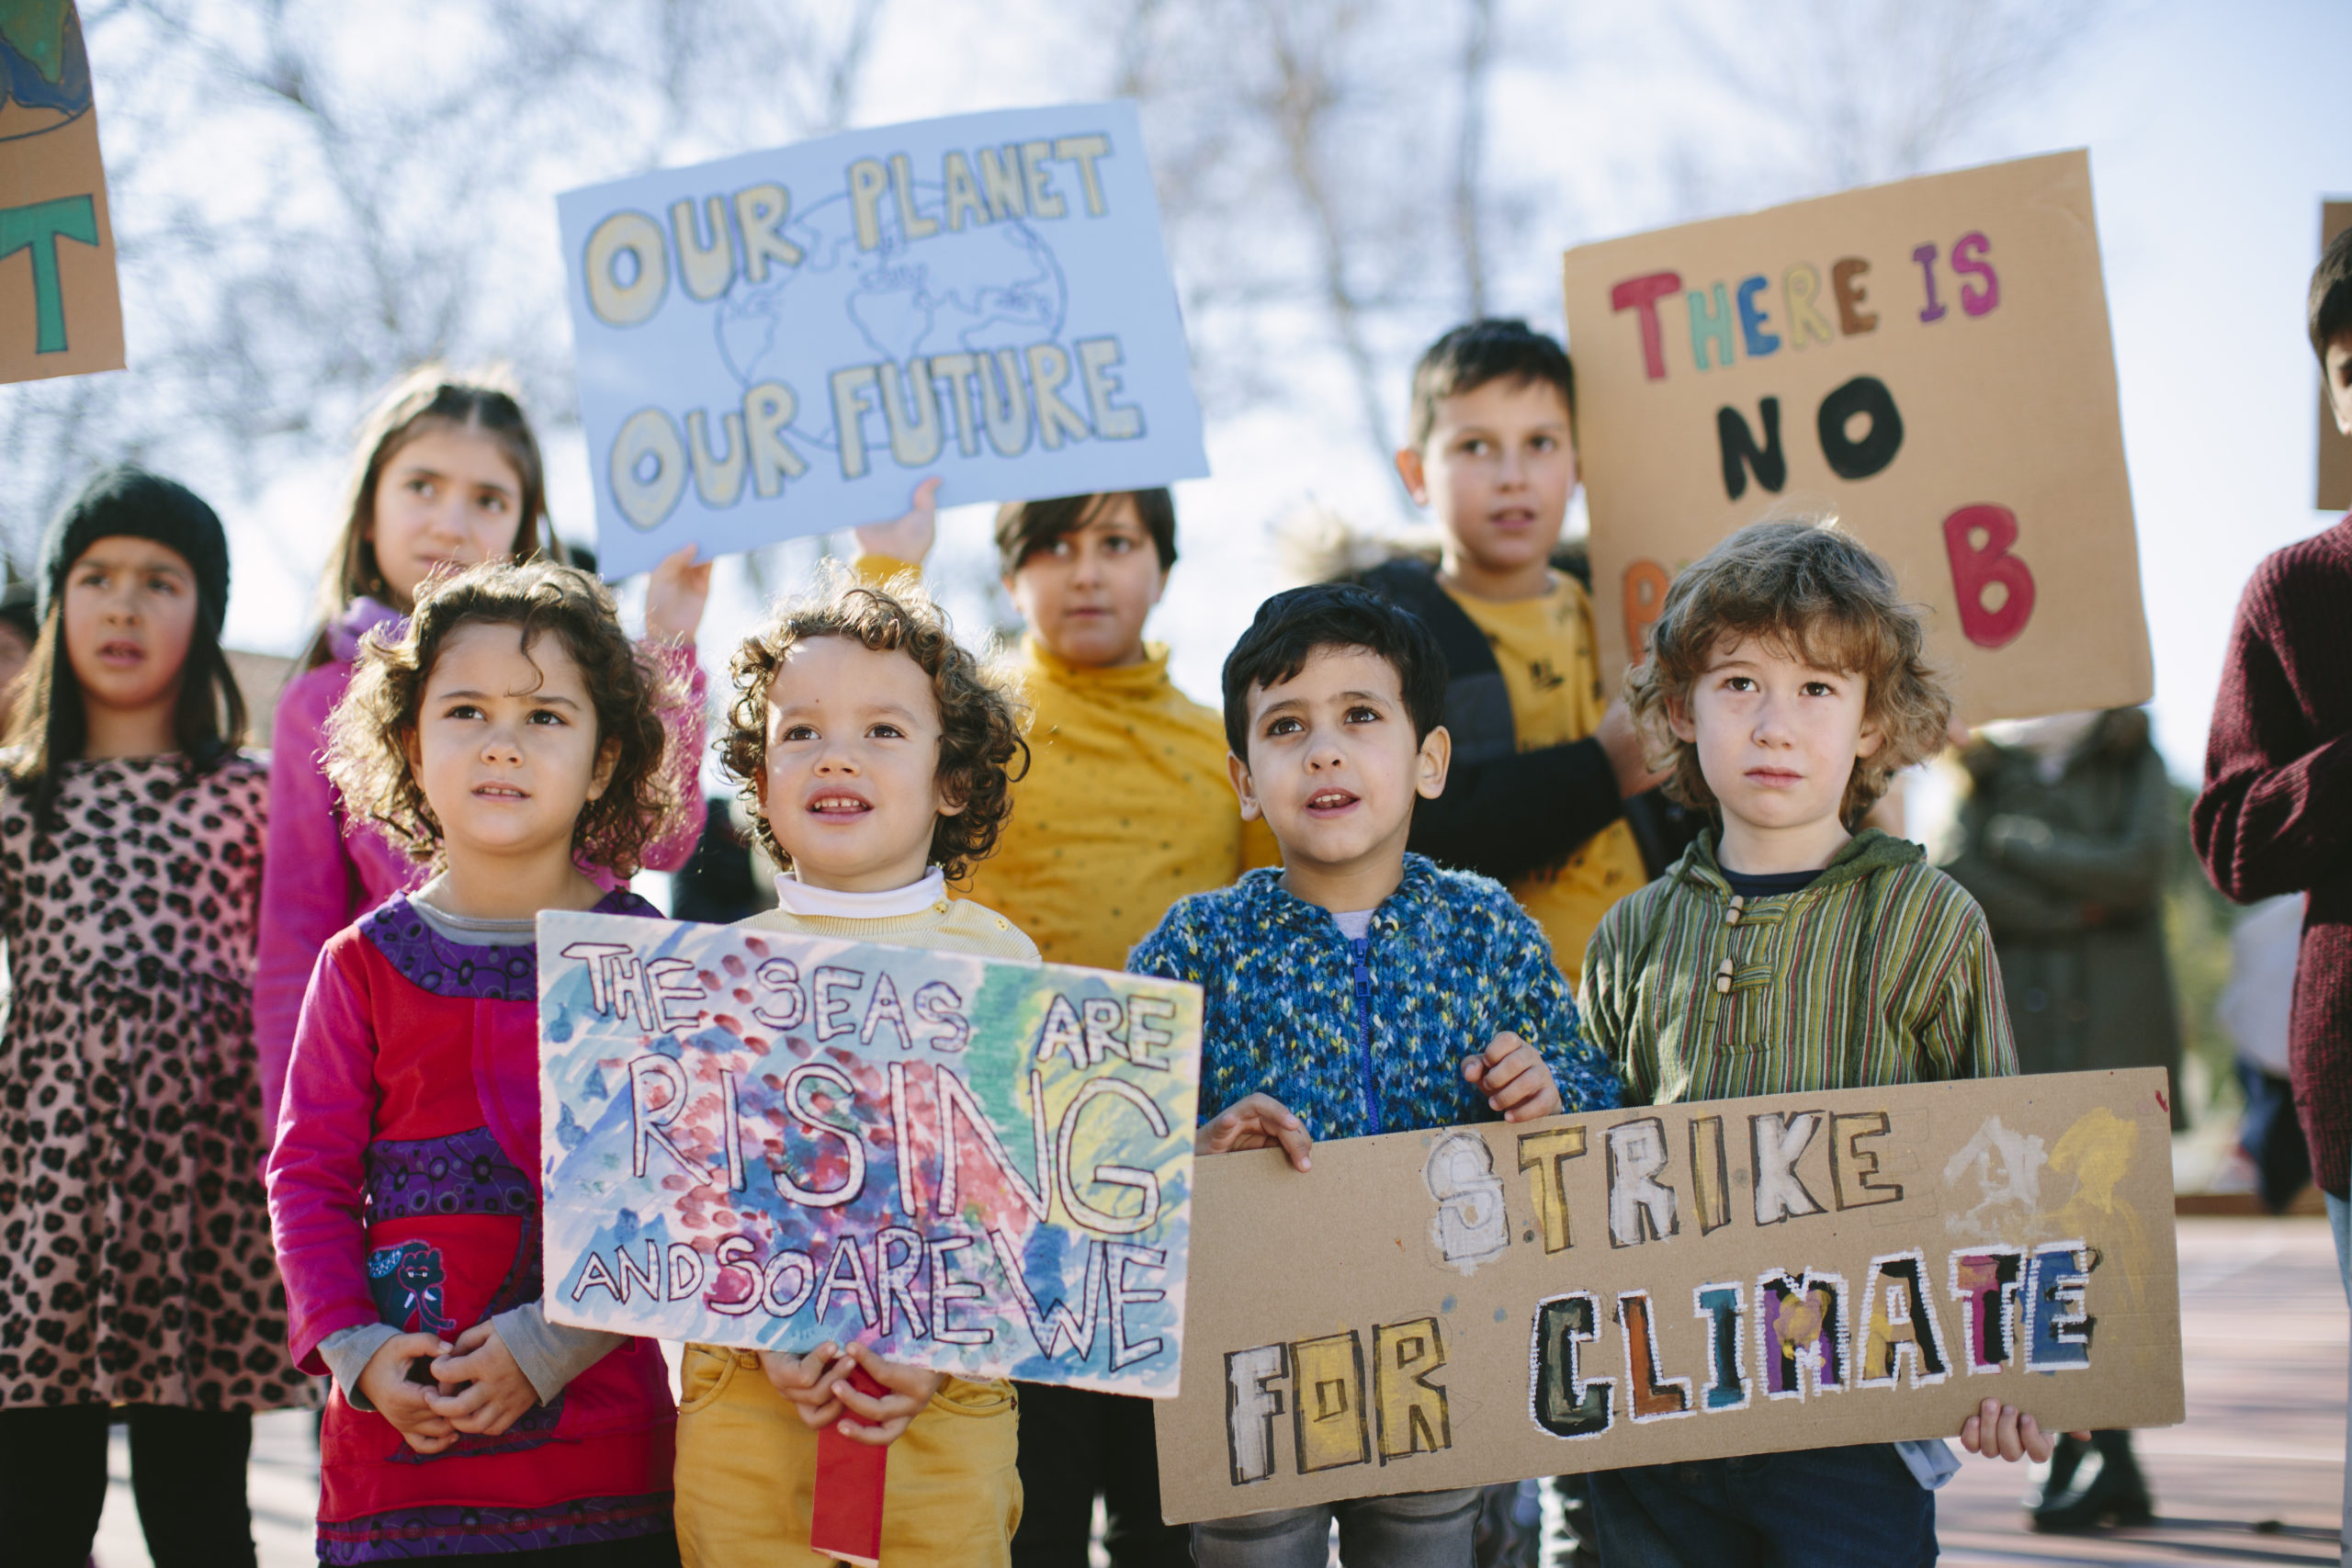 Group of young kids carrying banners